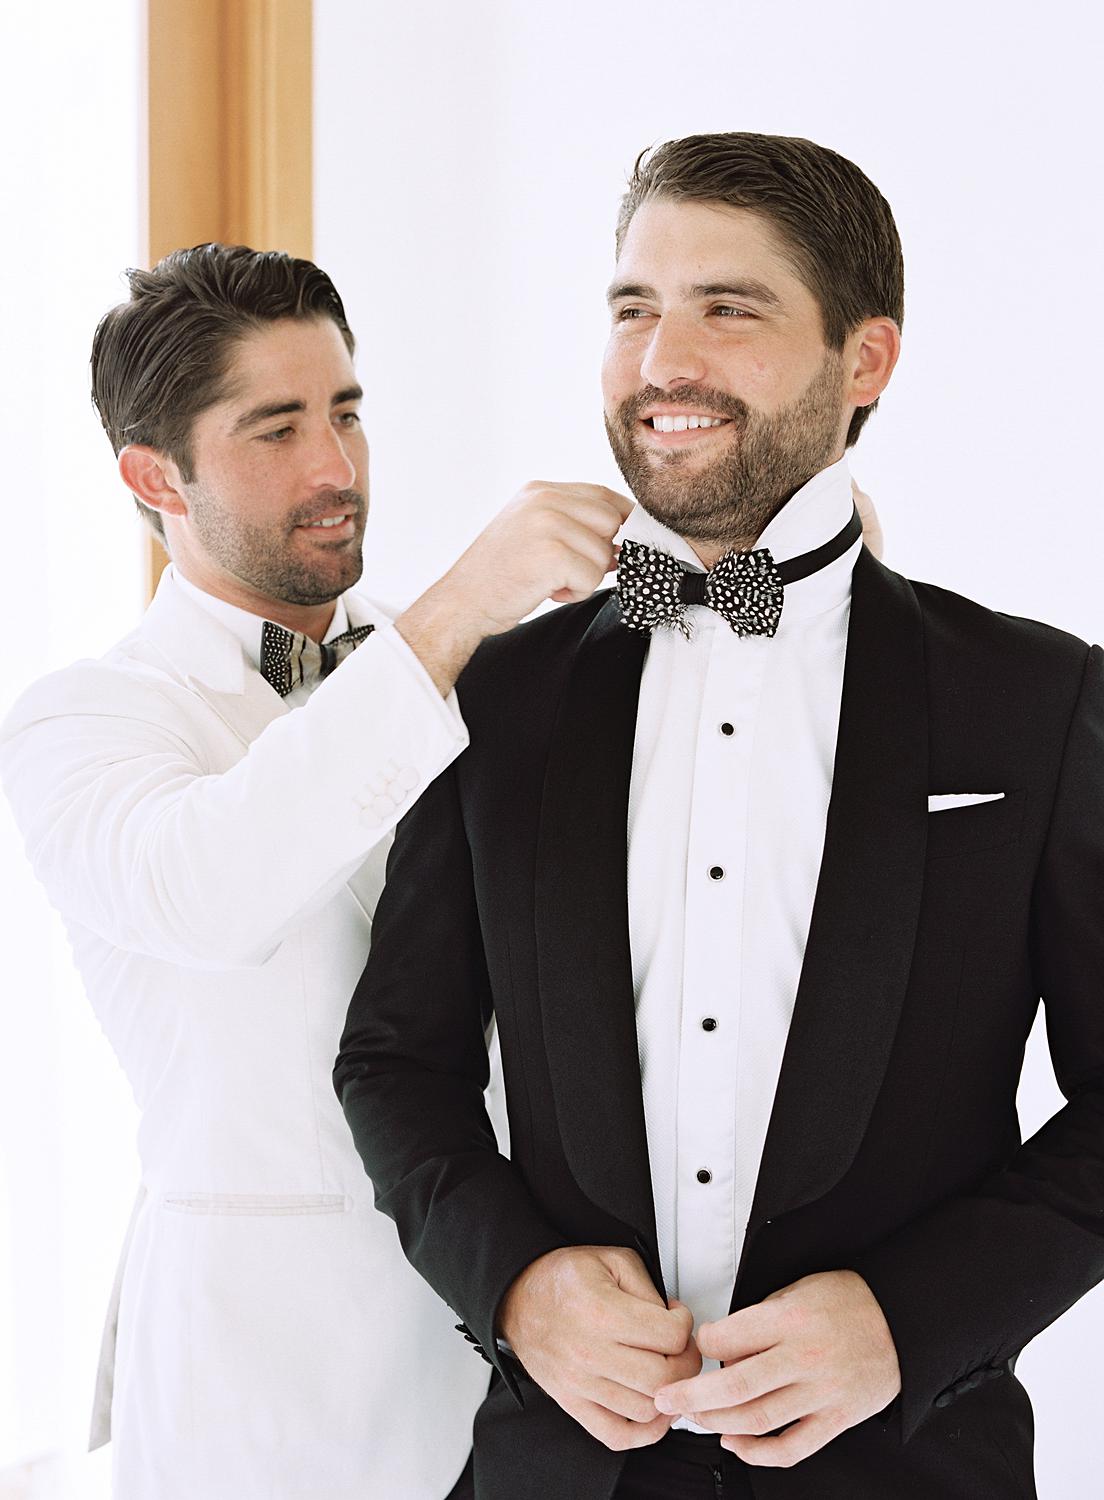 Groom's brother helping straighten his bowtie before heading out to their Altos de Chavón wedding.